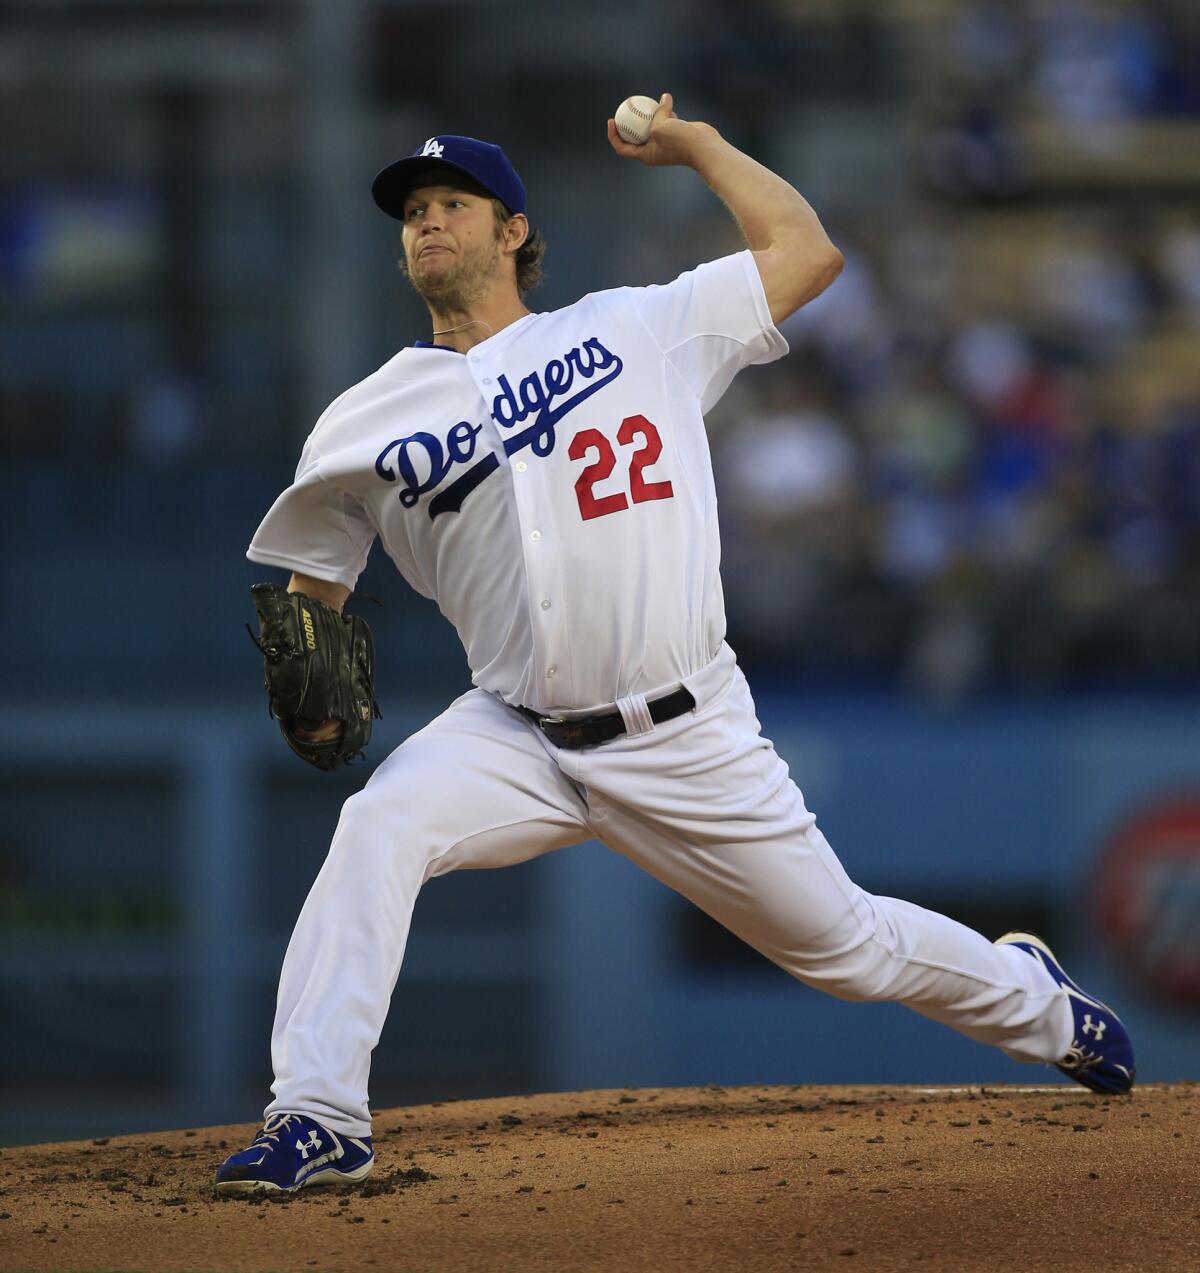 Clayton Kershaw delivers a pitch during the second inning of the Dodgers' 8-0 victory over the Atlanta Braves.